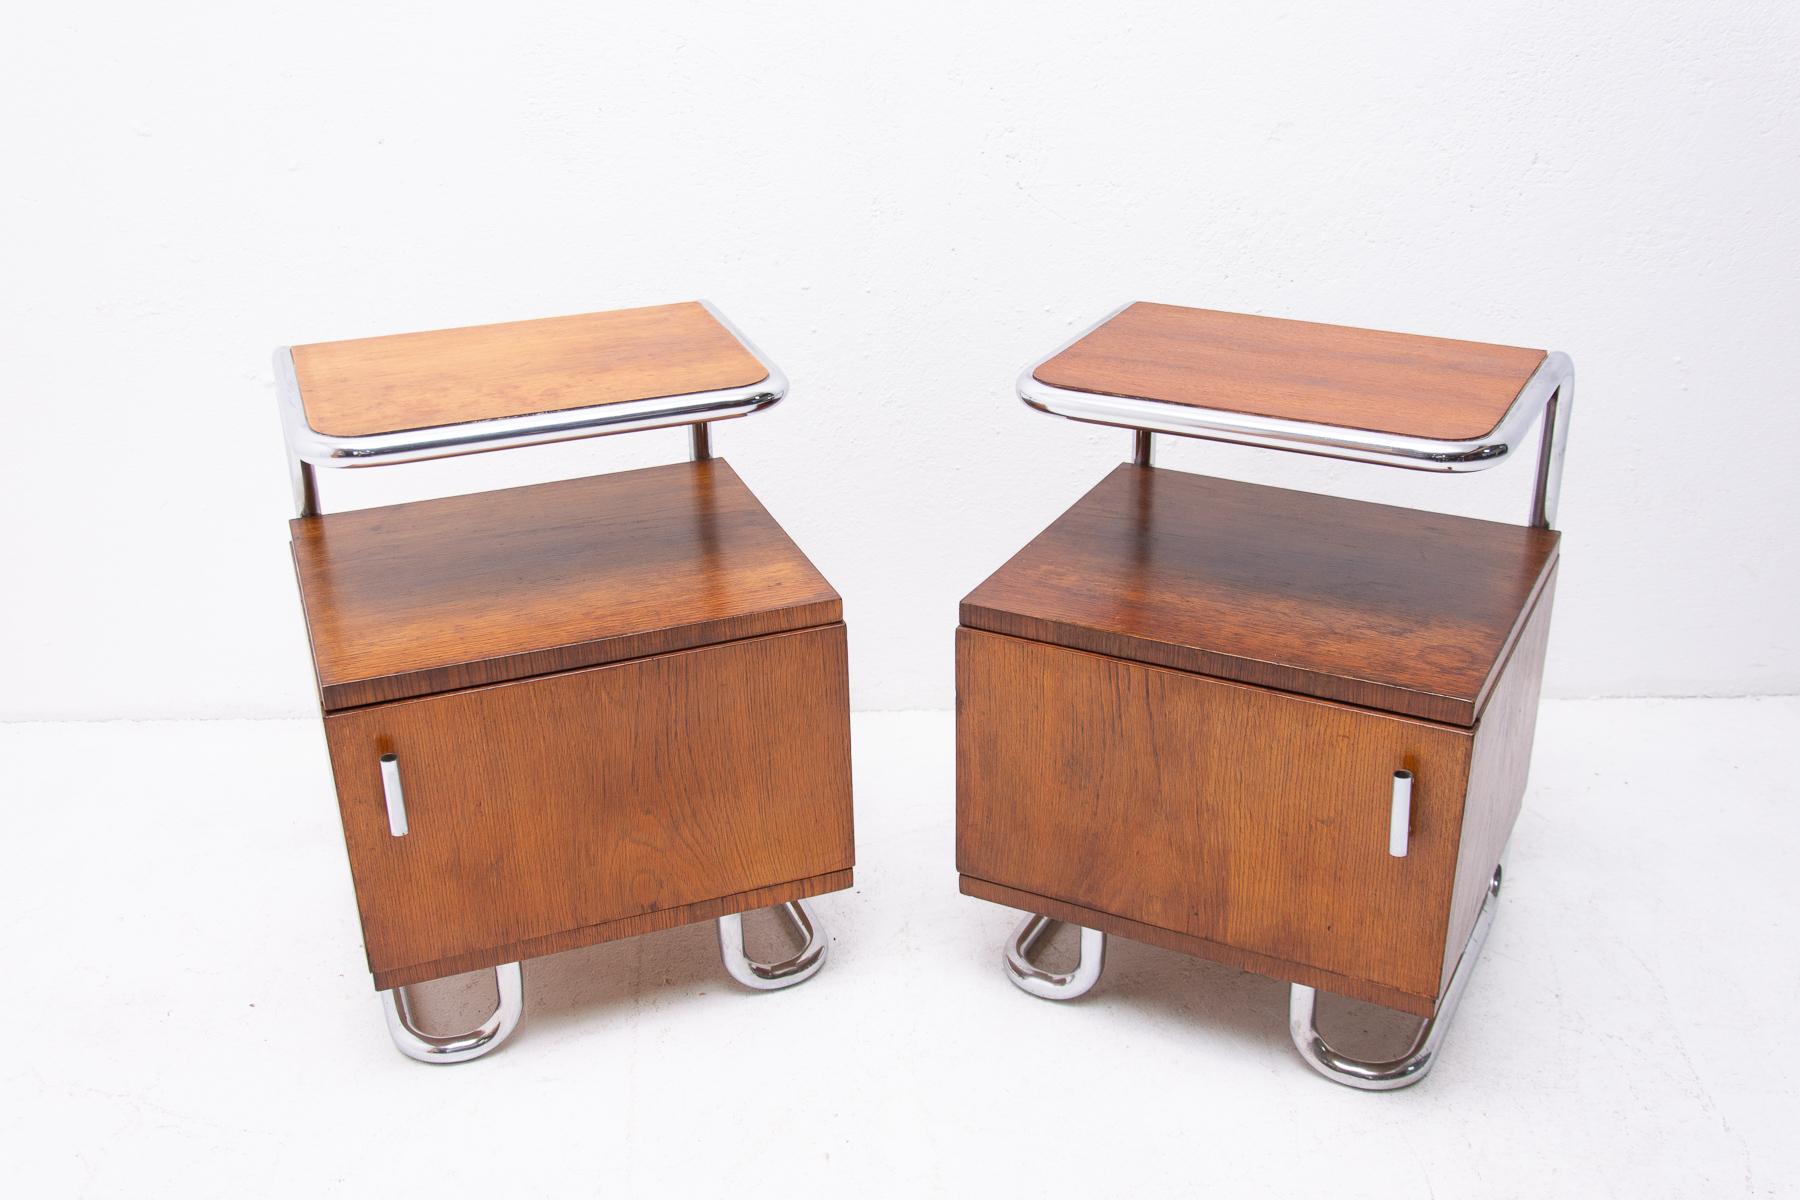 A pair of Modernist nightstands in the Bauhaus style. Outstanding timeless design. Made in the former Czechoslovakia. It was designed by Vichr & spol and made by Kovona company.

A typical example of the Bauhaus period in Central Europe. Chrome is